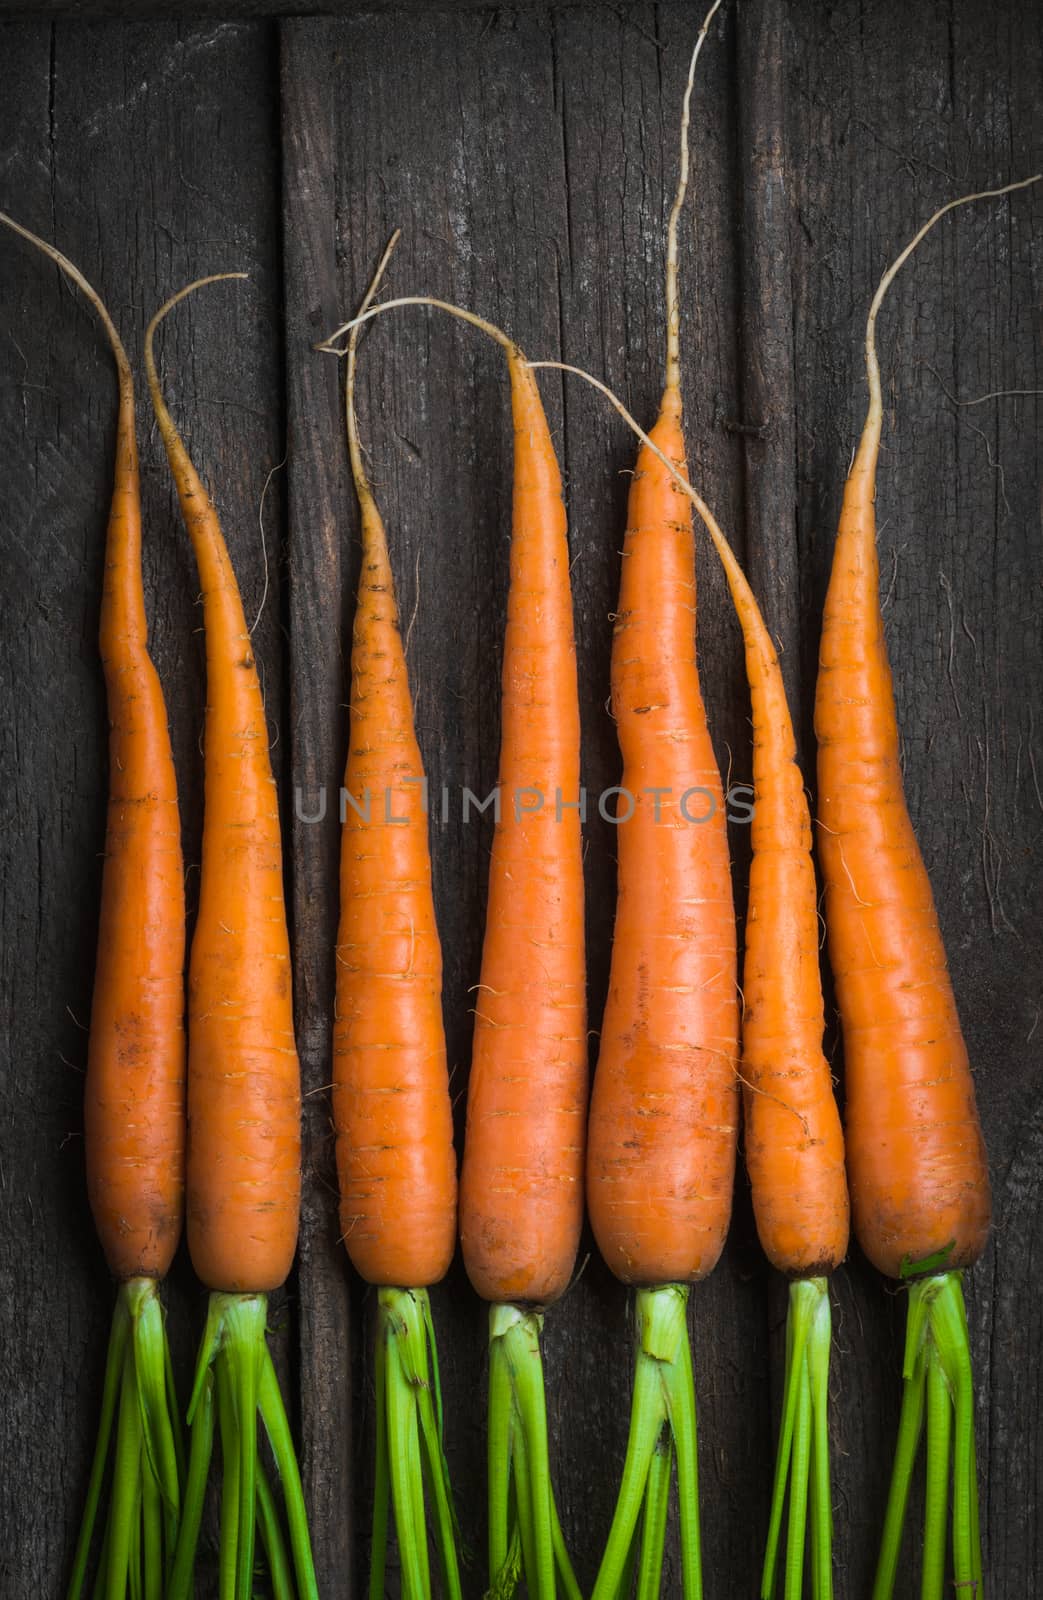 Fresh young carrots in an old wooden box top view close up